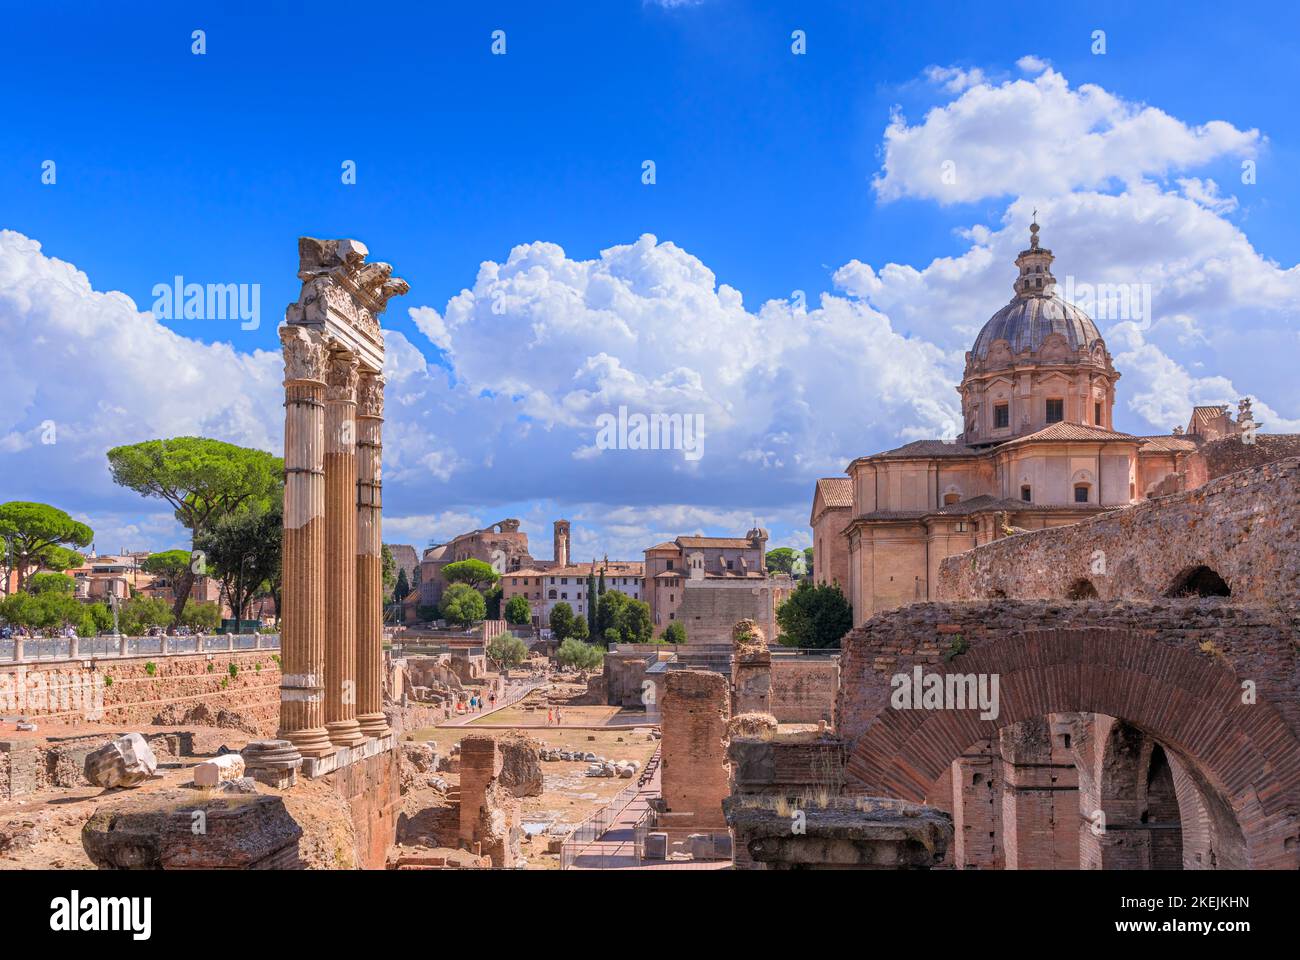 Ancient roman ruins of the Forum of Caesar in Rome, Italy. Stock Photo